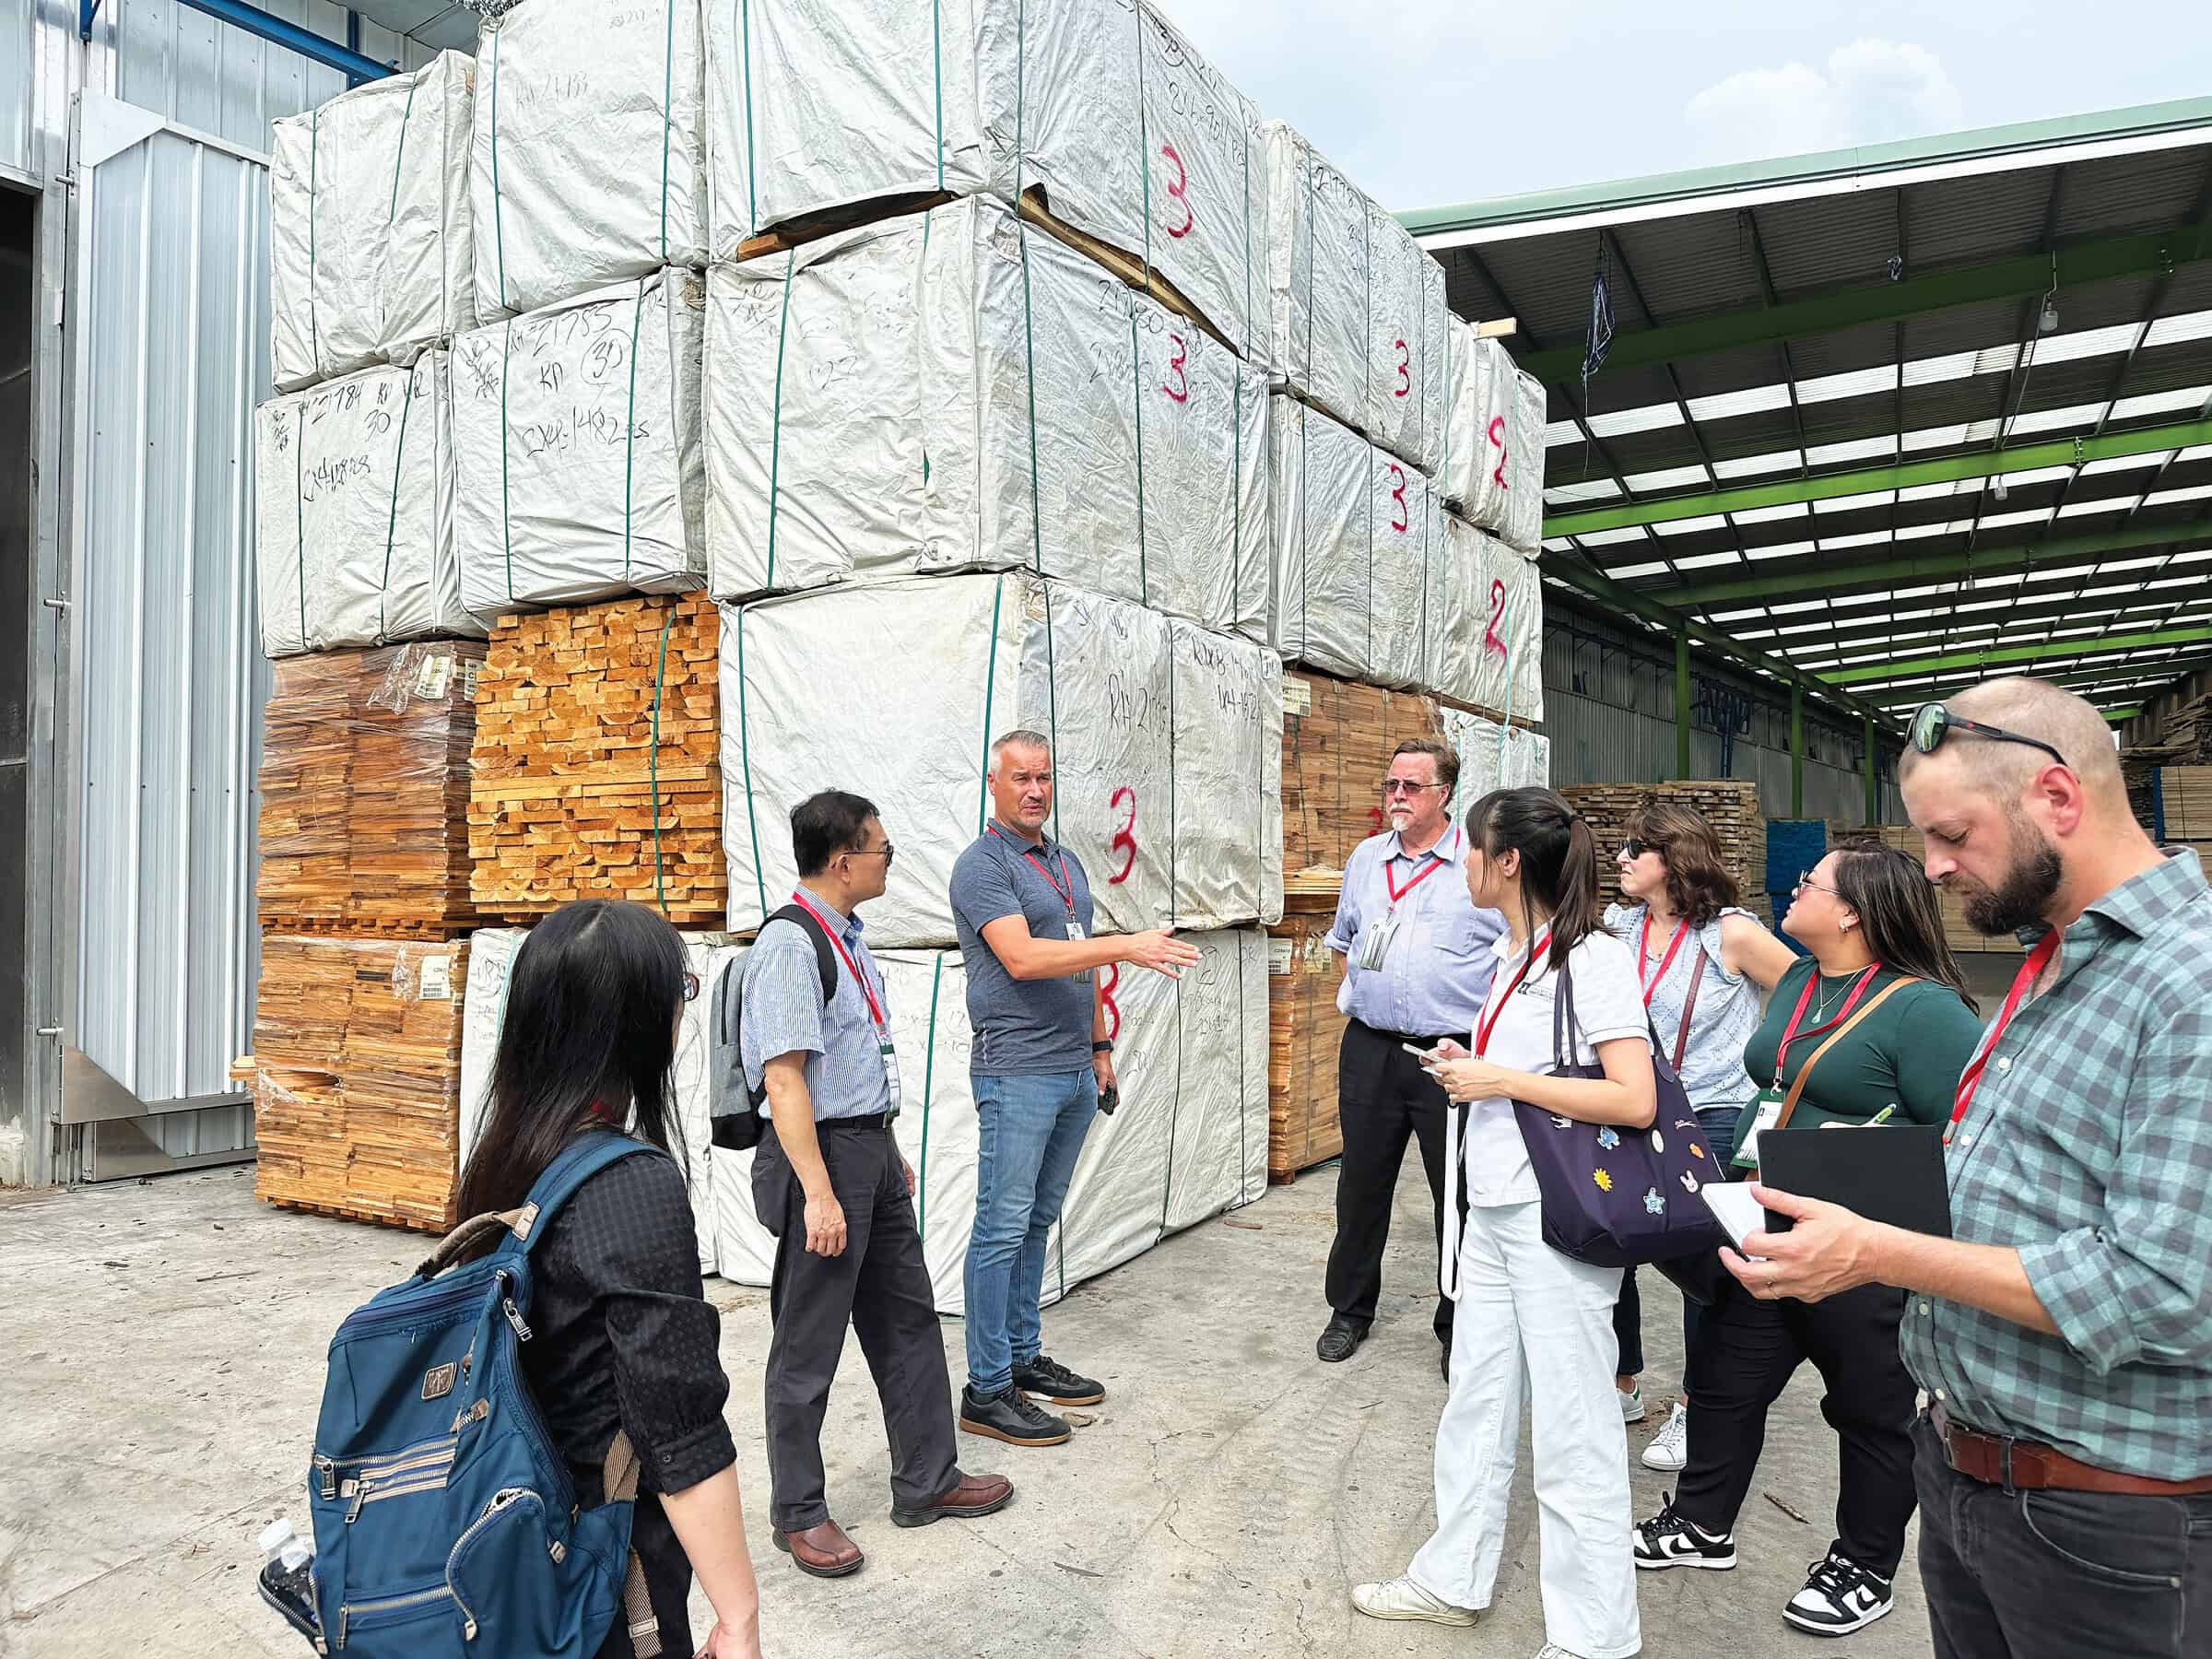 Softwood Export Council Trade Missions Generate International Sales For U.S Suppliers 4